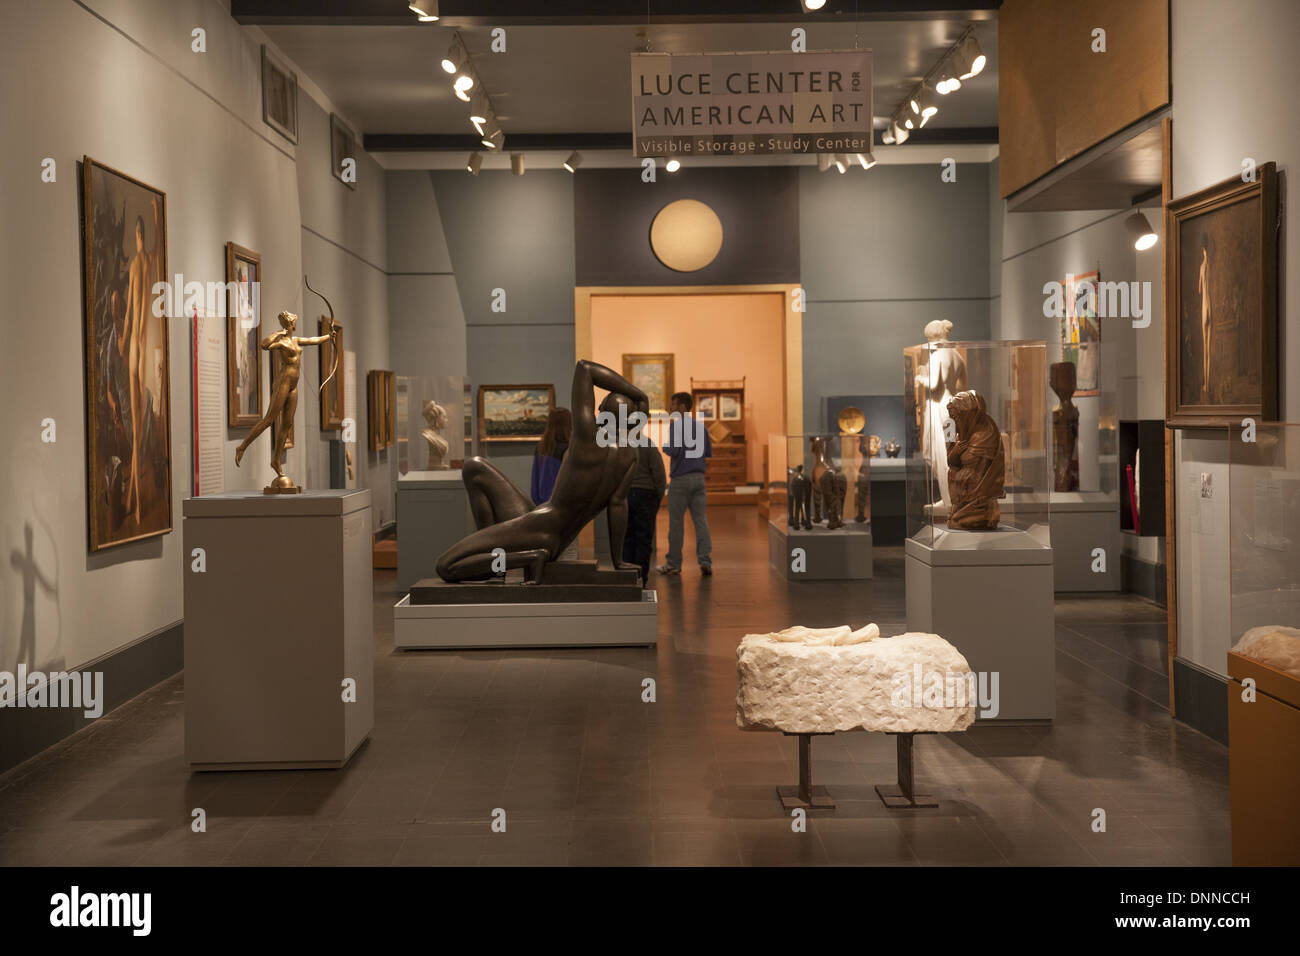 Luce Center for American Art, visible storage study center at the Brooklyn Museum, Brooklyn, NY. Stock Photo